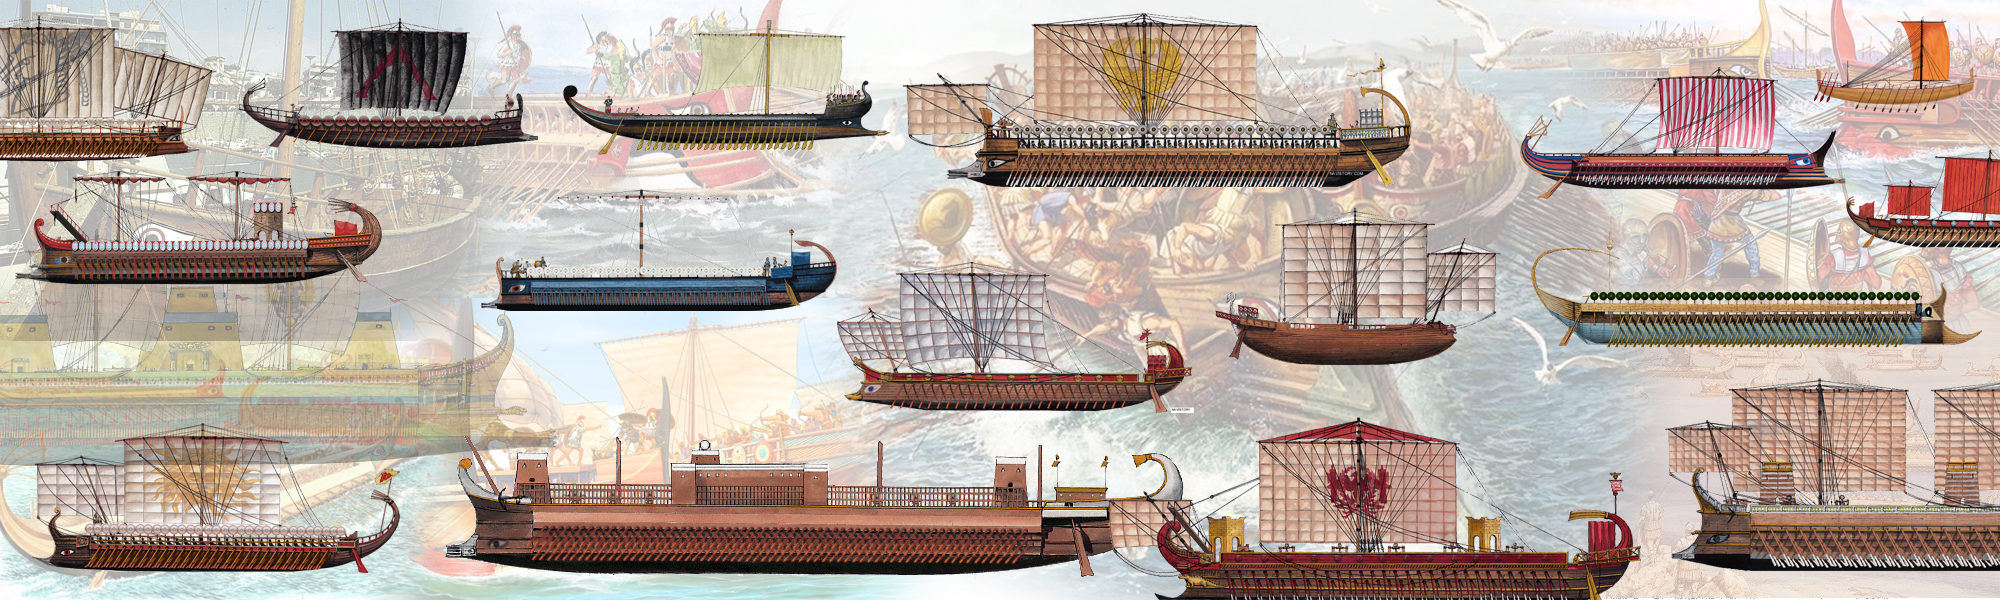 The Roman Naval War with Antiochos Part I